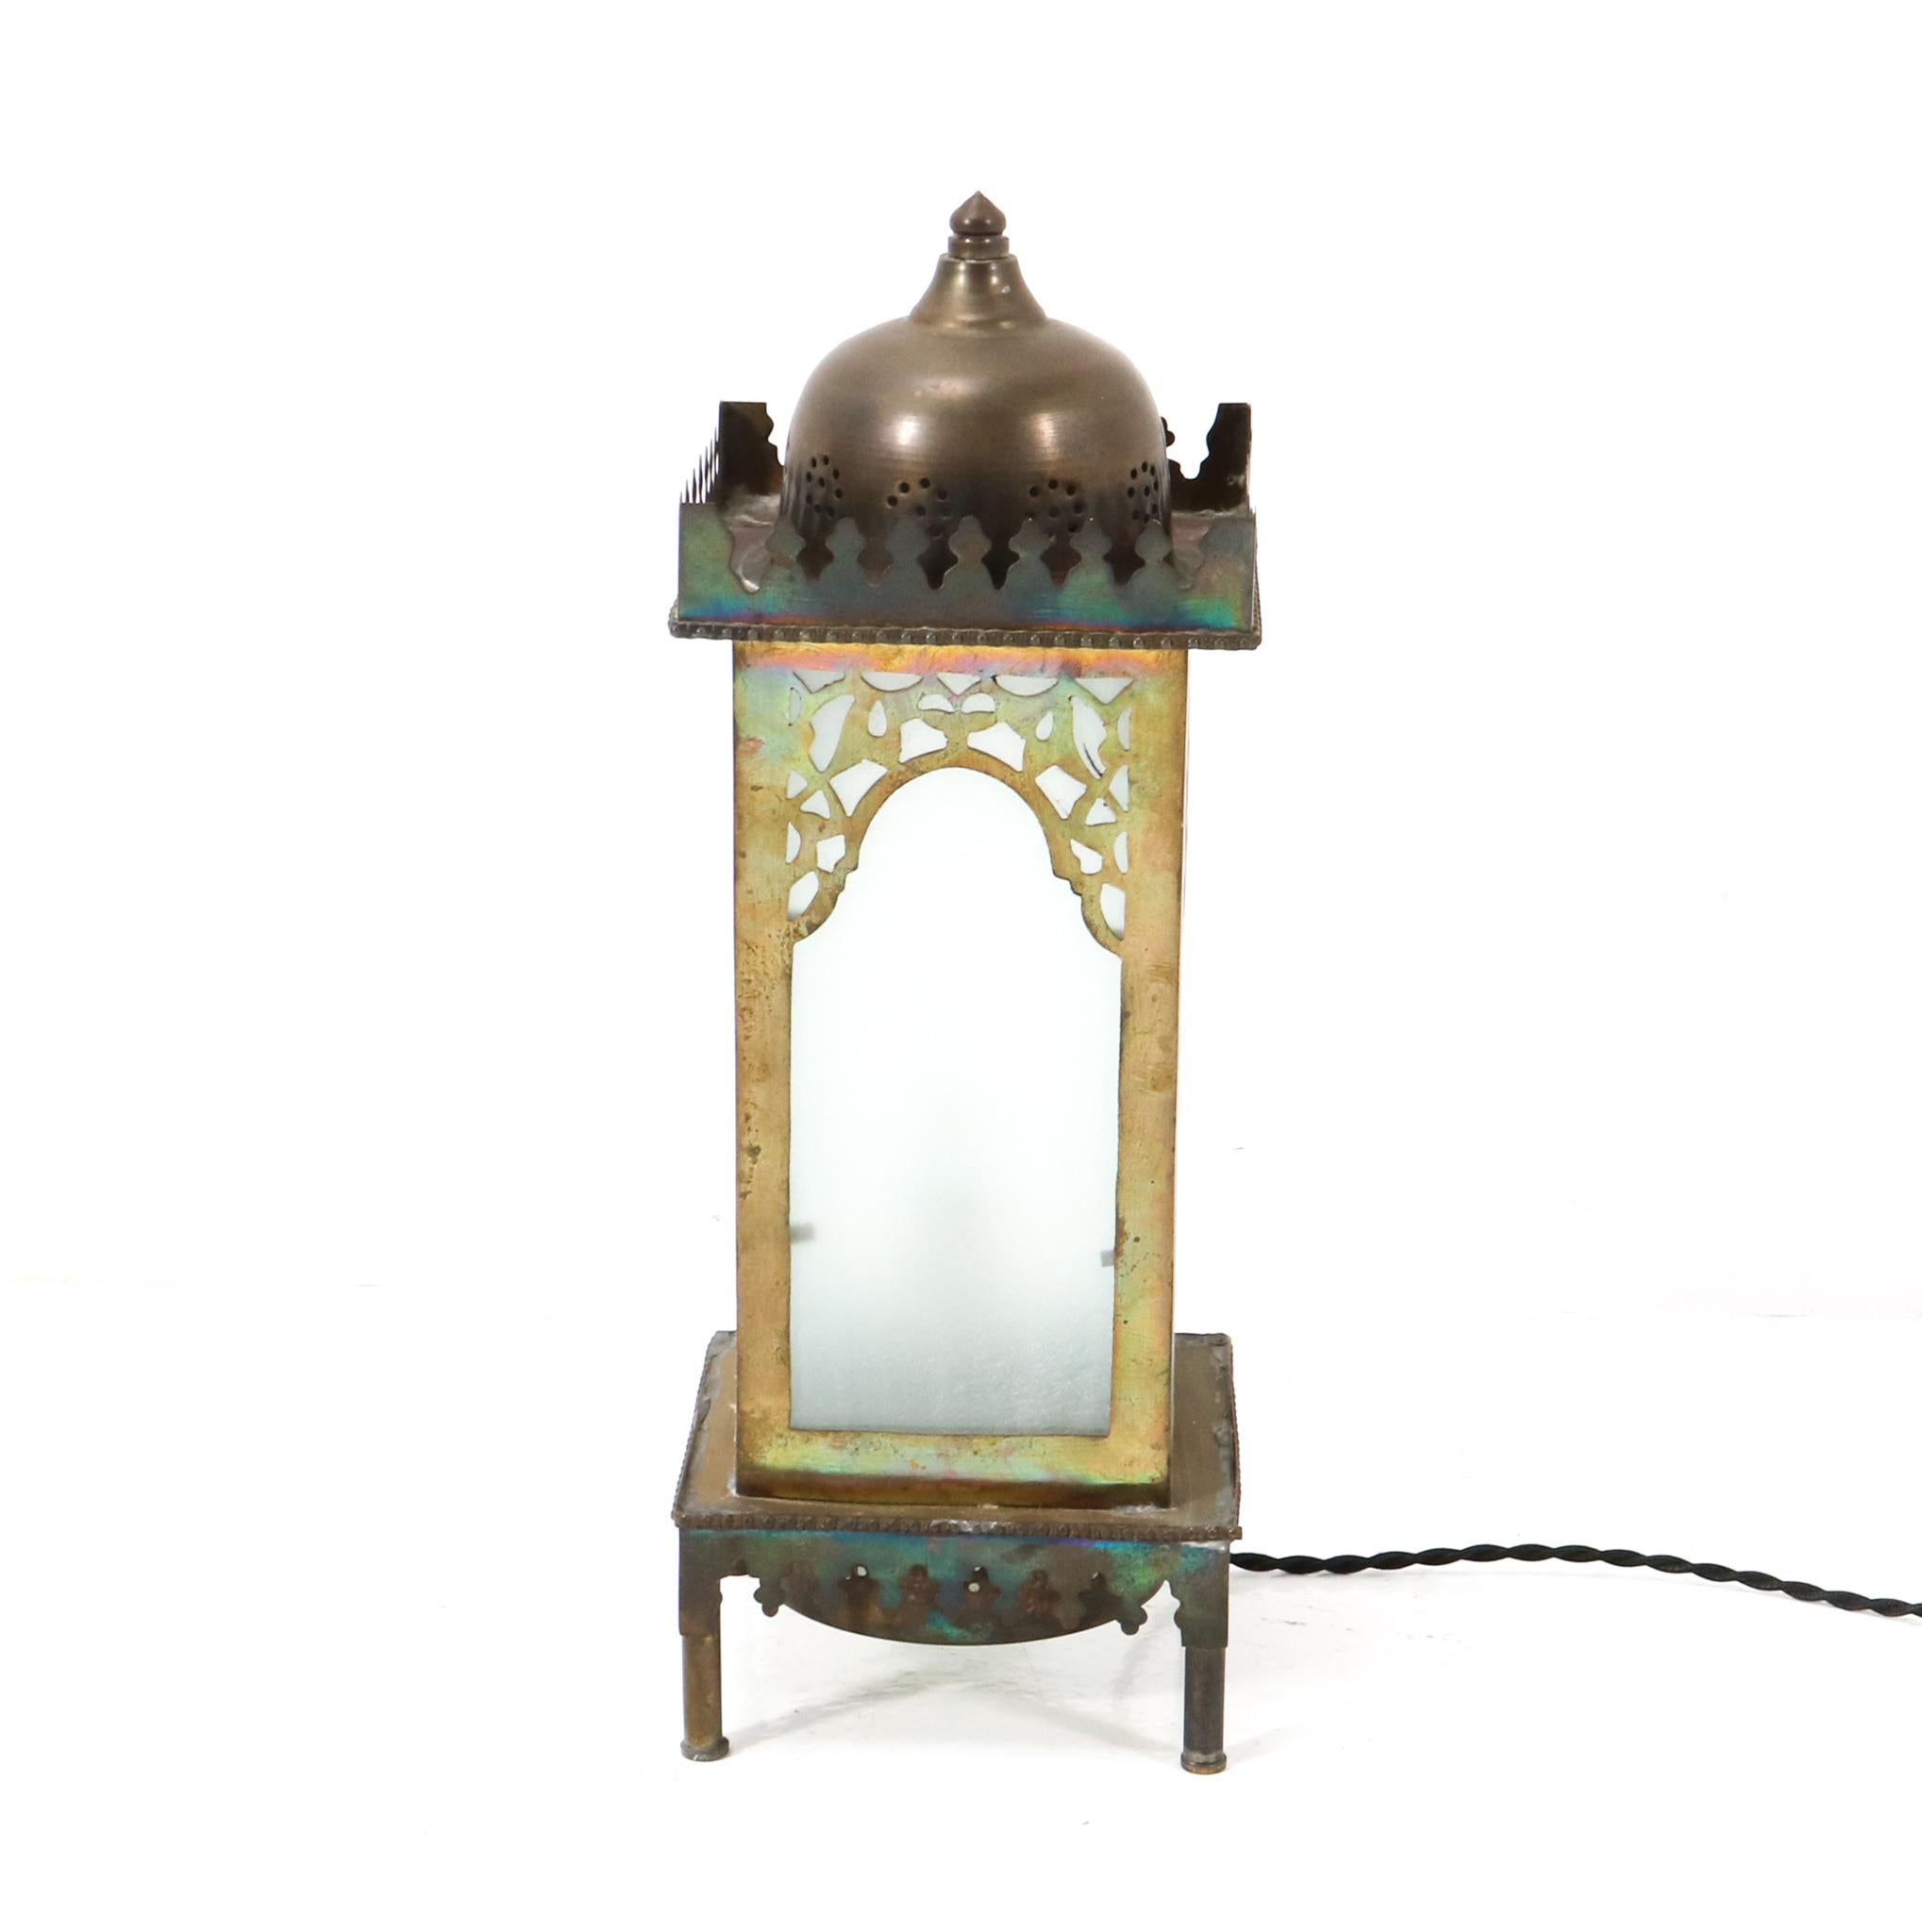 Early 20th Century Patinated Brass Arts & Crafts Art Nouveau Table Lamp, 1900s For Sale